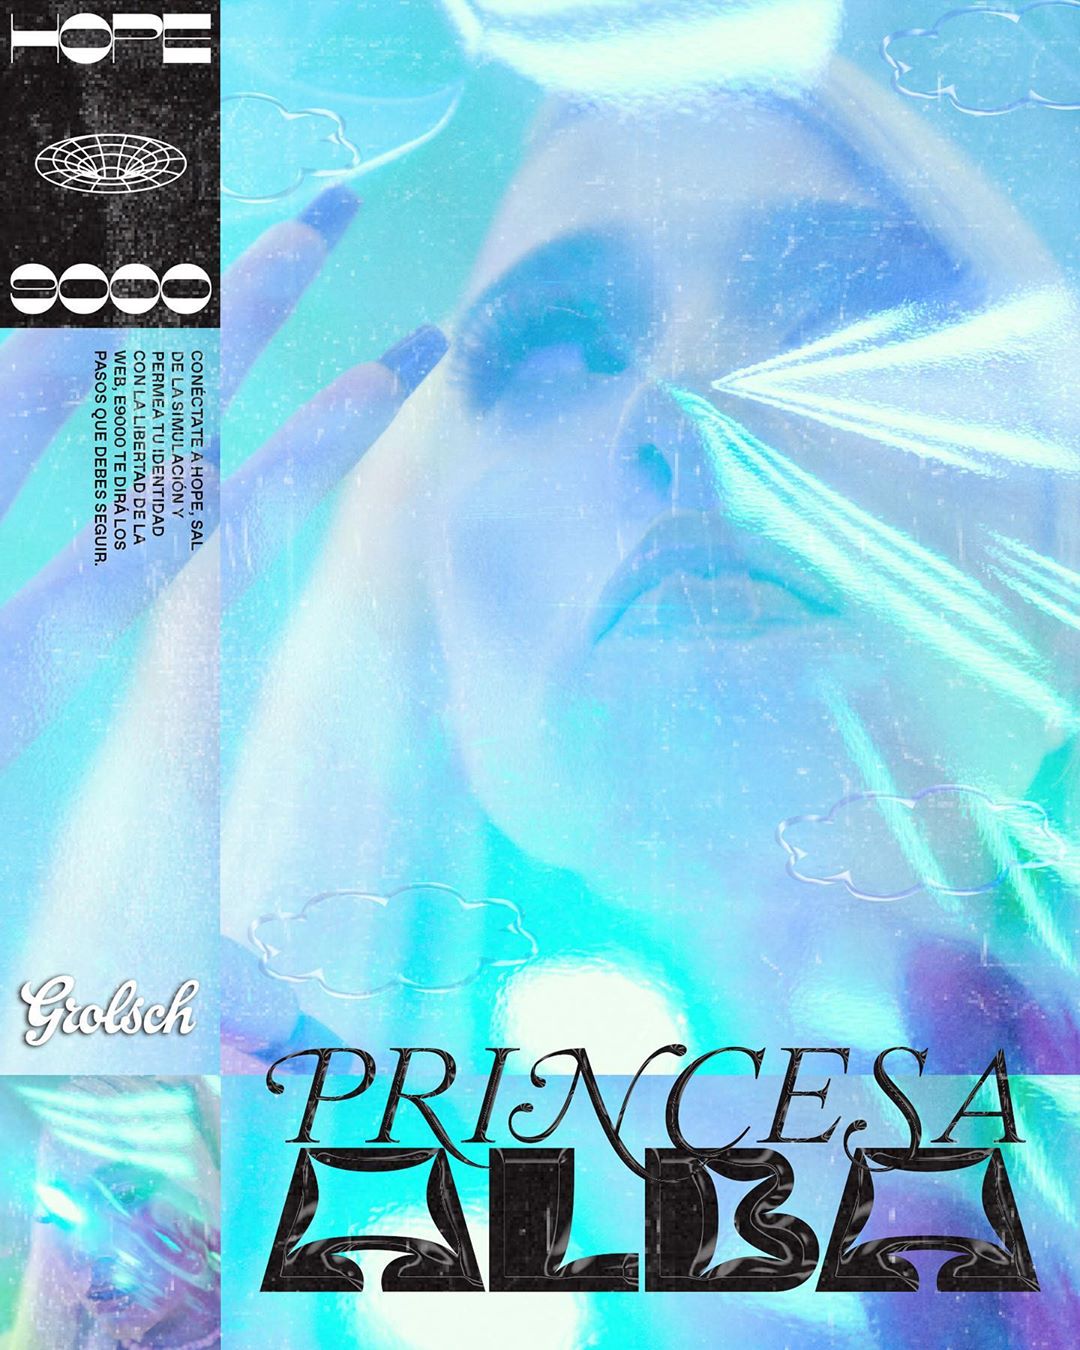 Hii, the font for "princesa" and "alba" please <3